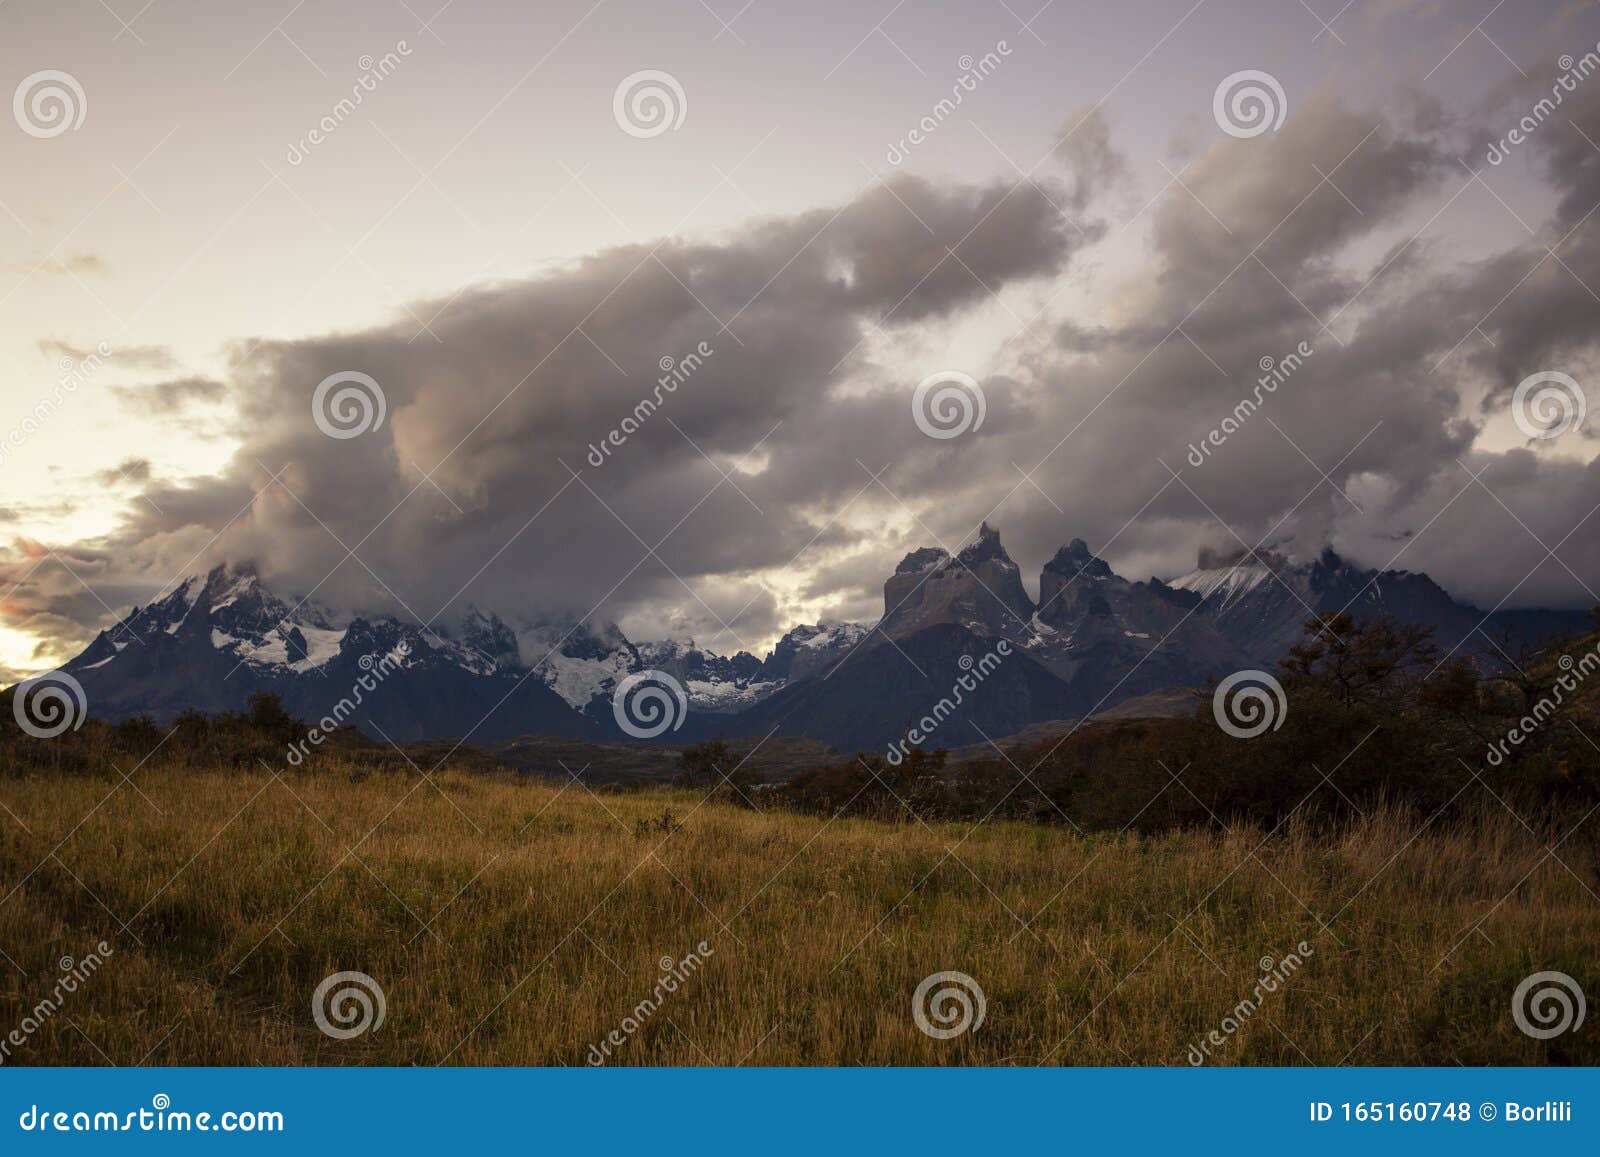 guernos mountains landscape, national park torres del paine, patagonia, chile, south america